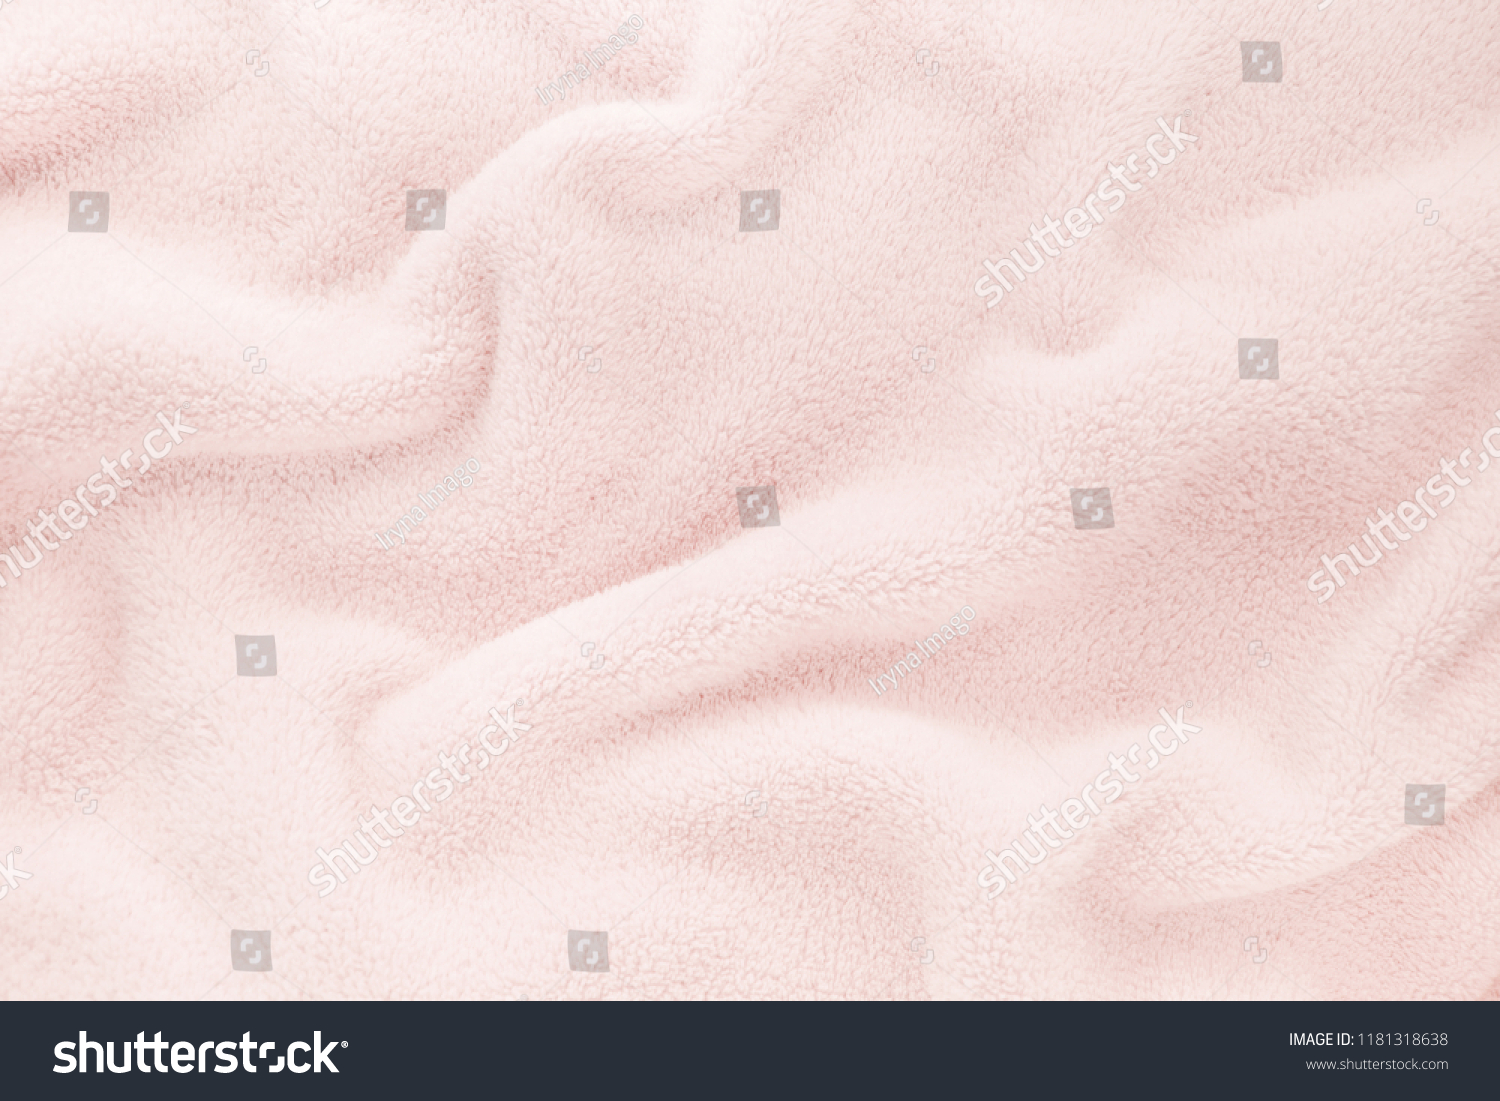 Fluffy Gentle baby pastel pink rose fabric with waves and folds. Soft pastel textile texture. Folds on the soft fabric. Rose towel terry cloth. #1181318638